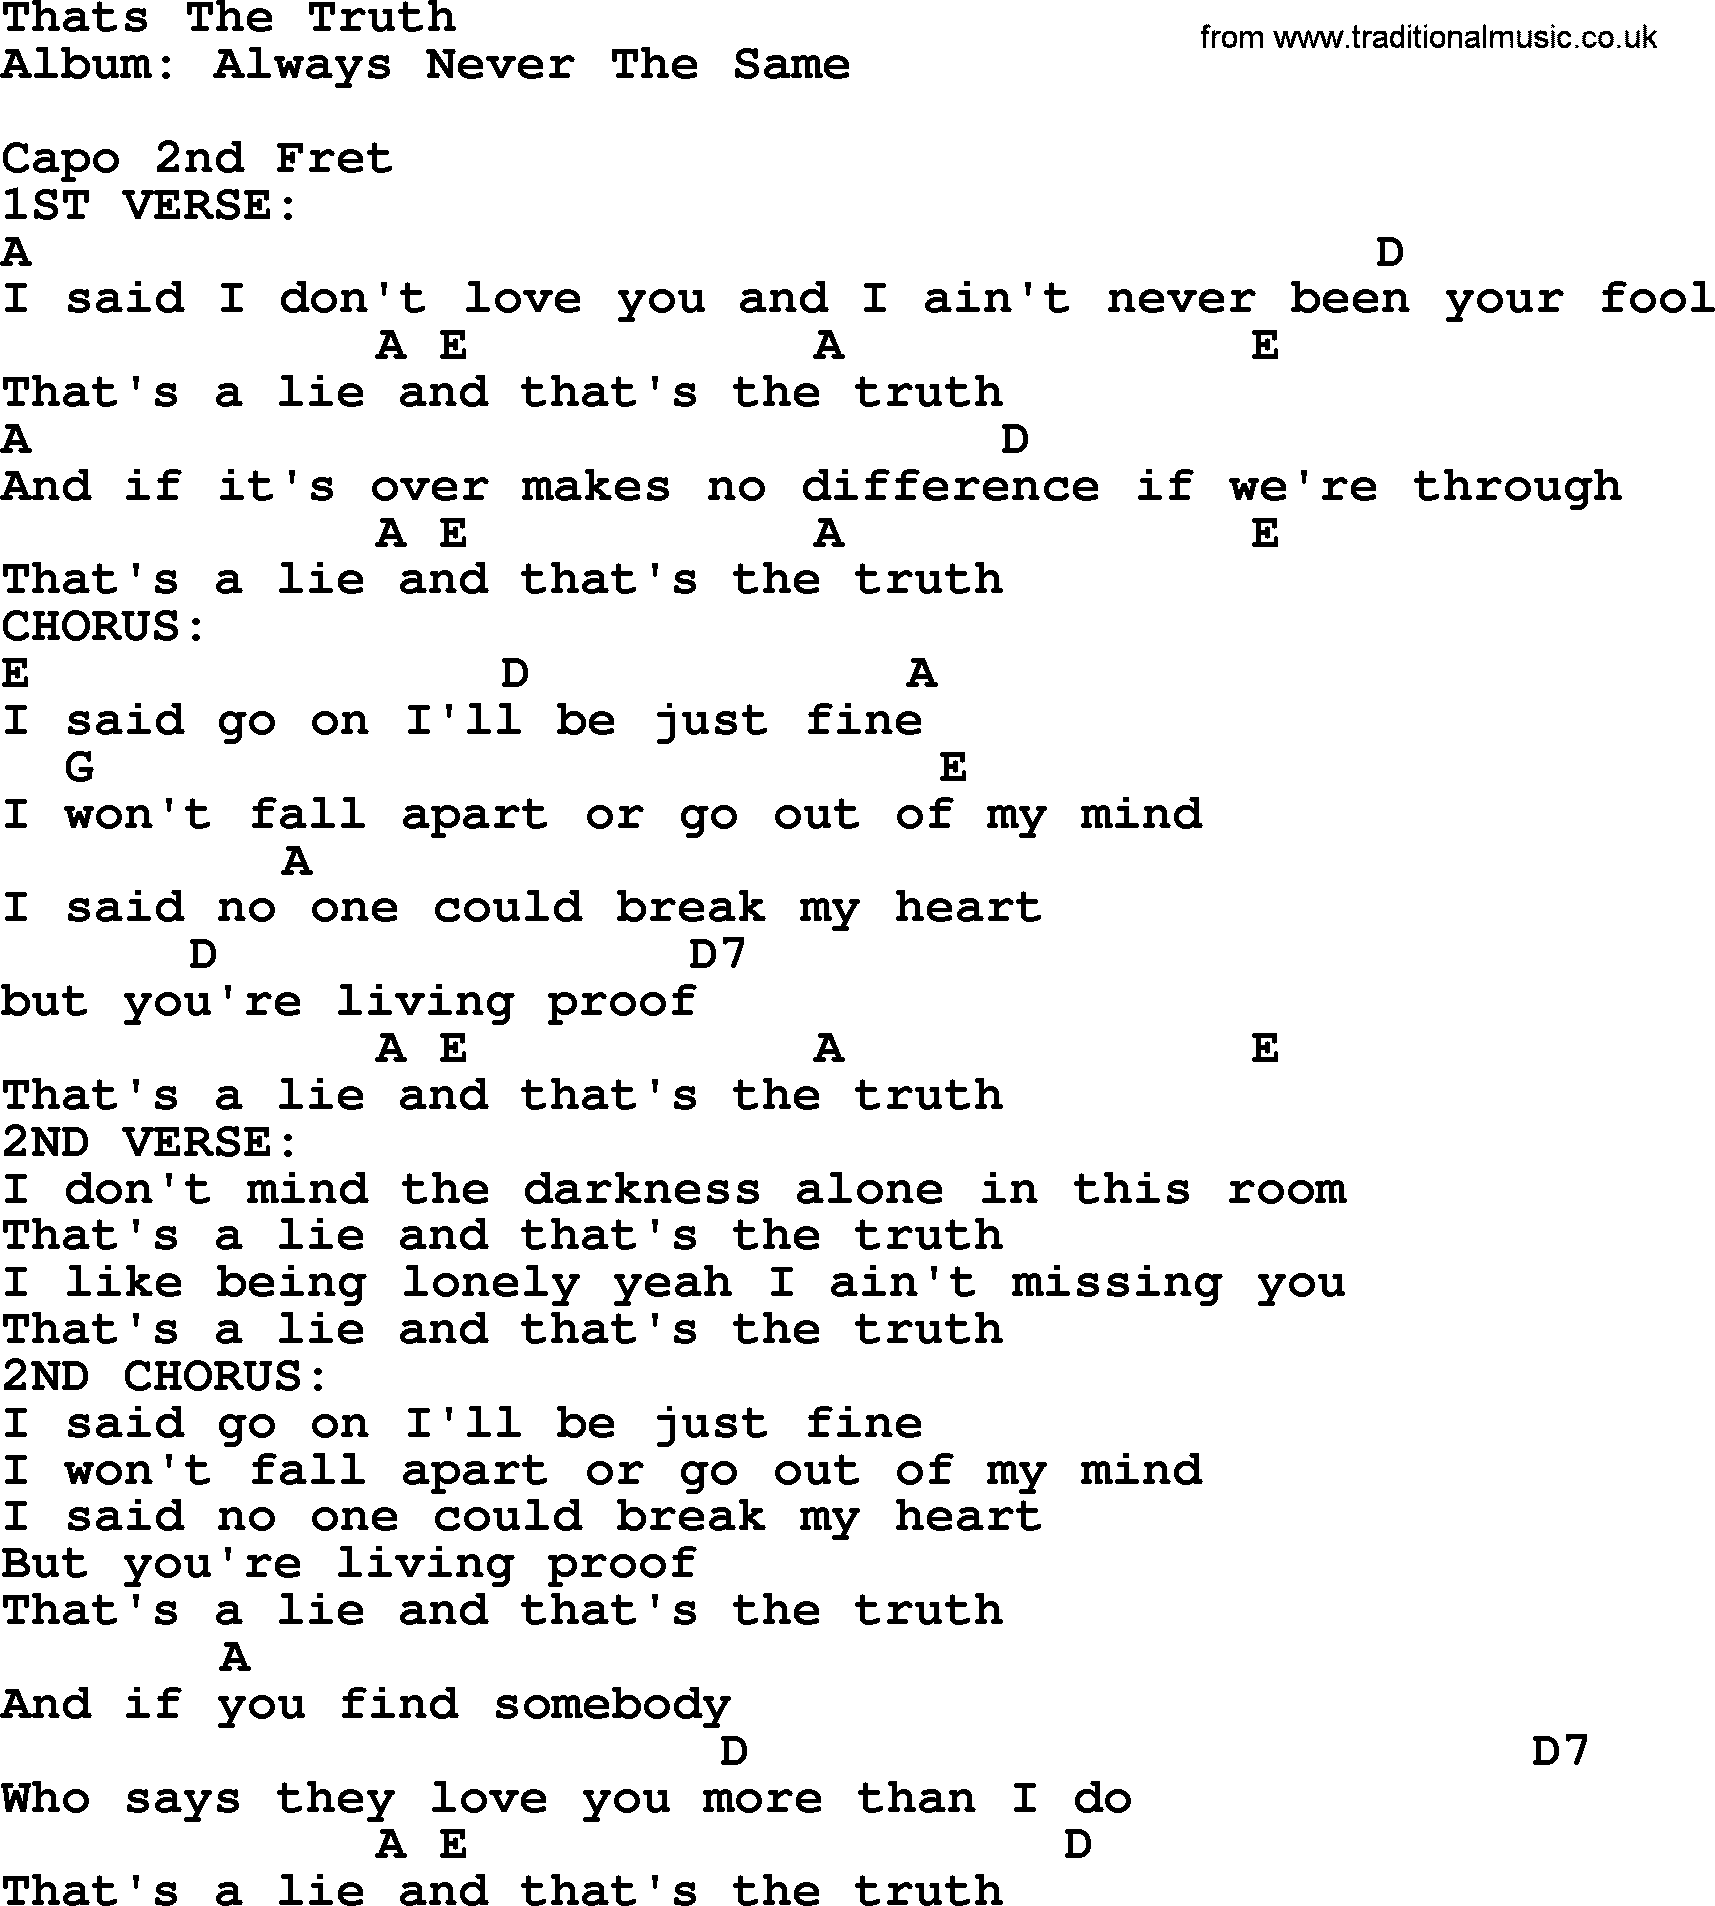 George Strait song: Thats The Truth, lyrics and chords